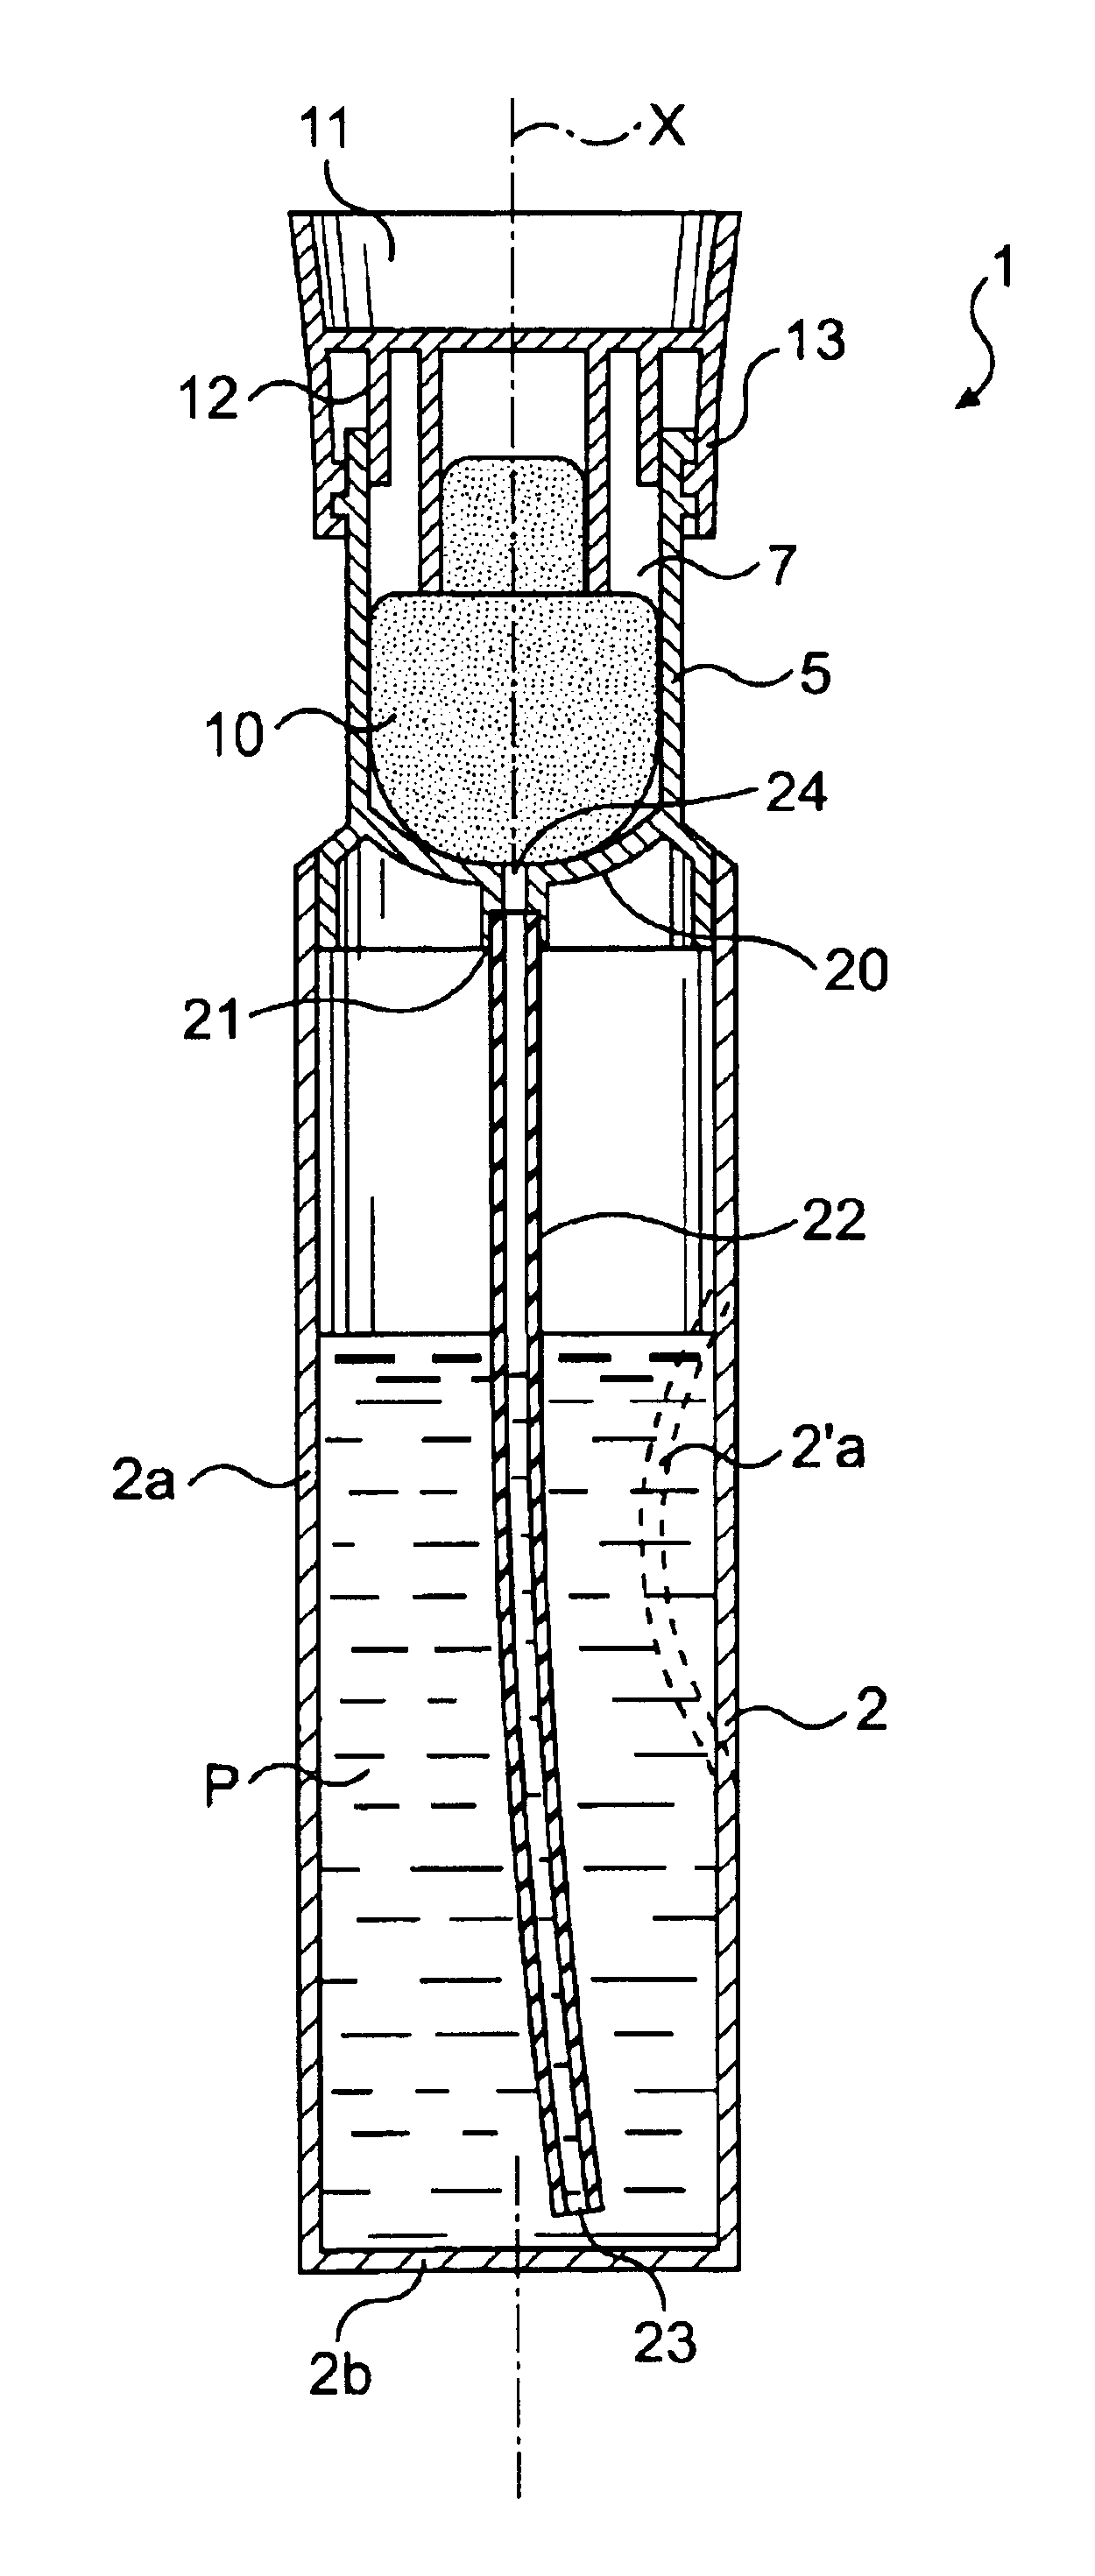 Product application device including a dip tube